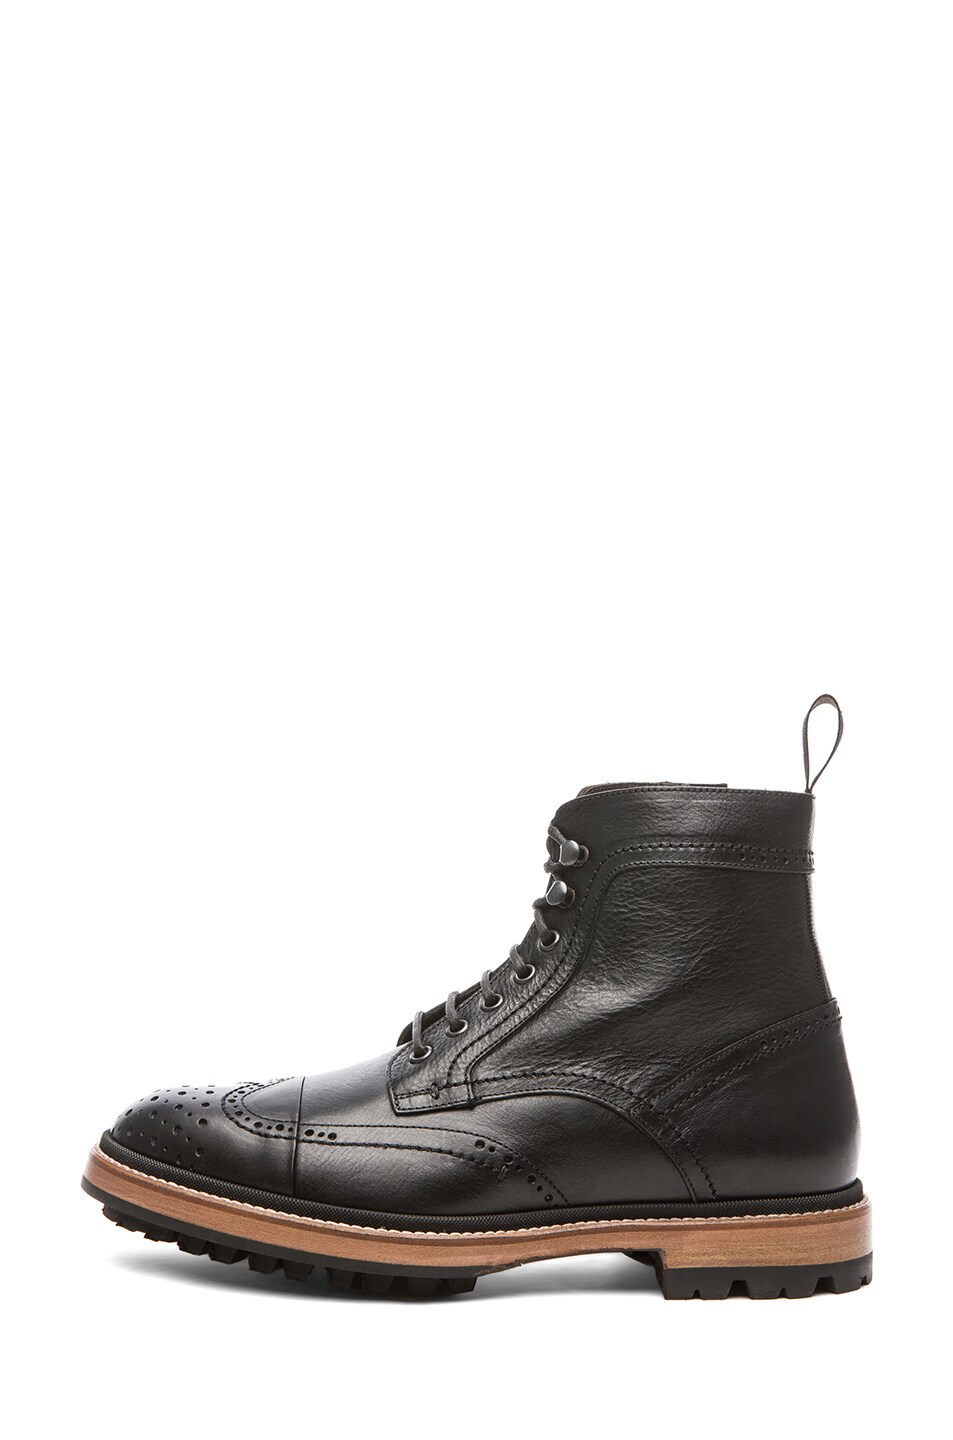 Image 1 of Lanvin Grain Calfskin Leather Zipped Boots in Black